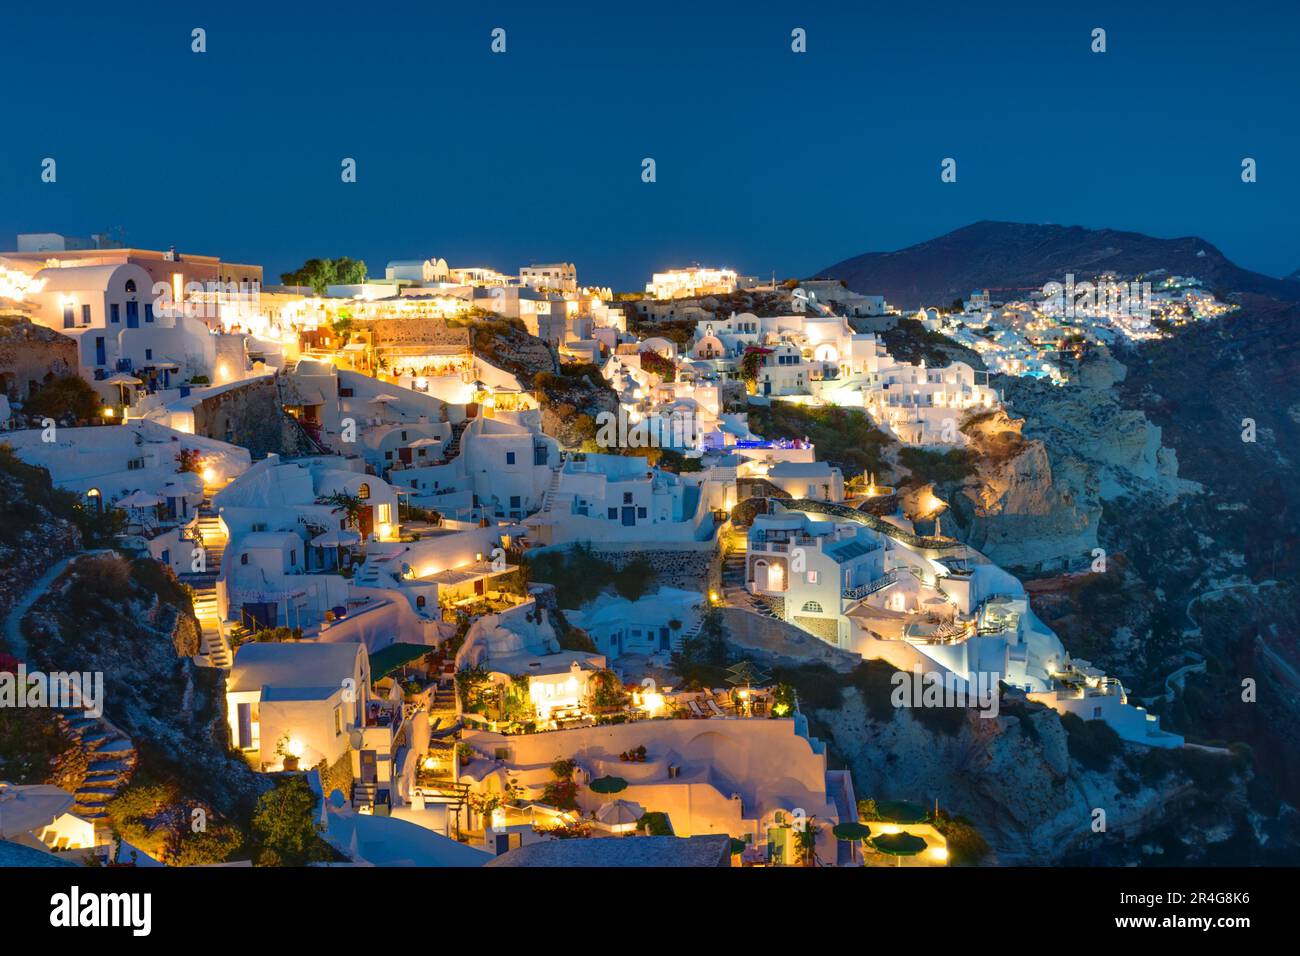 The small village of Oia on the Greek island of Santorini at night Stock Photo